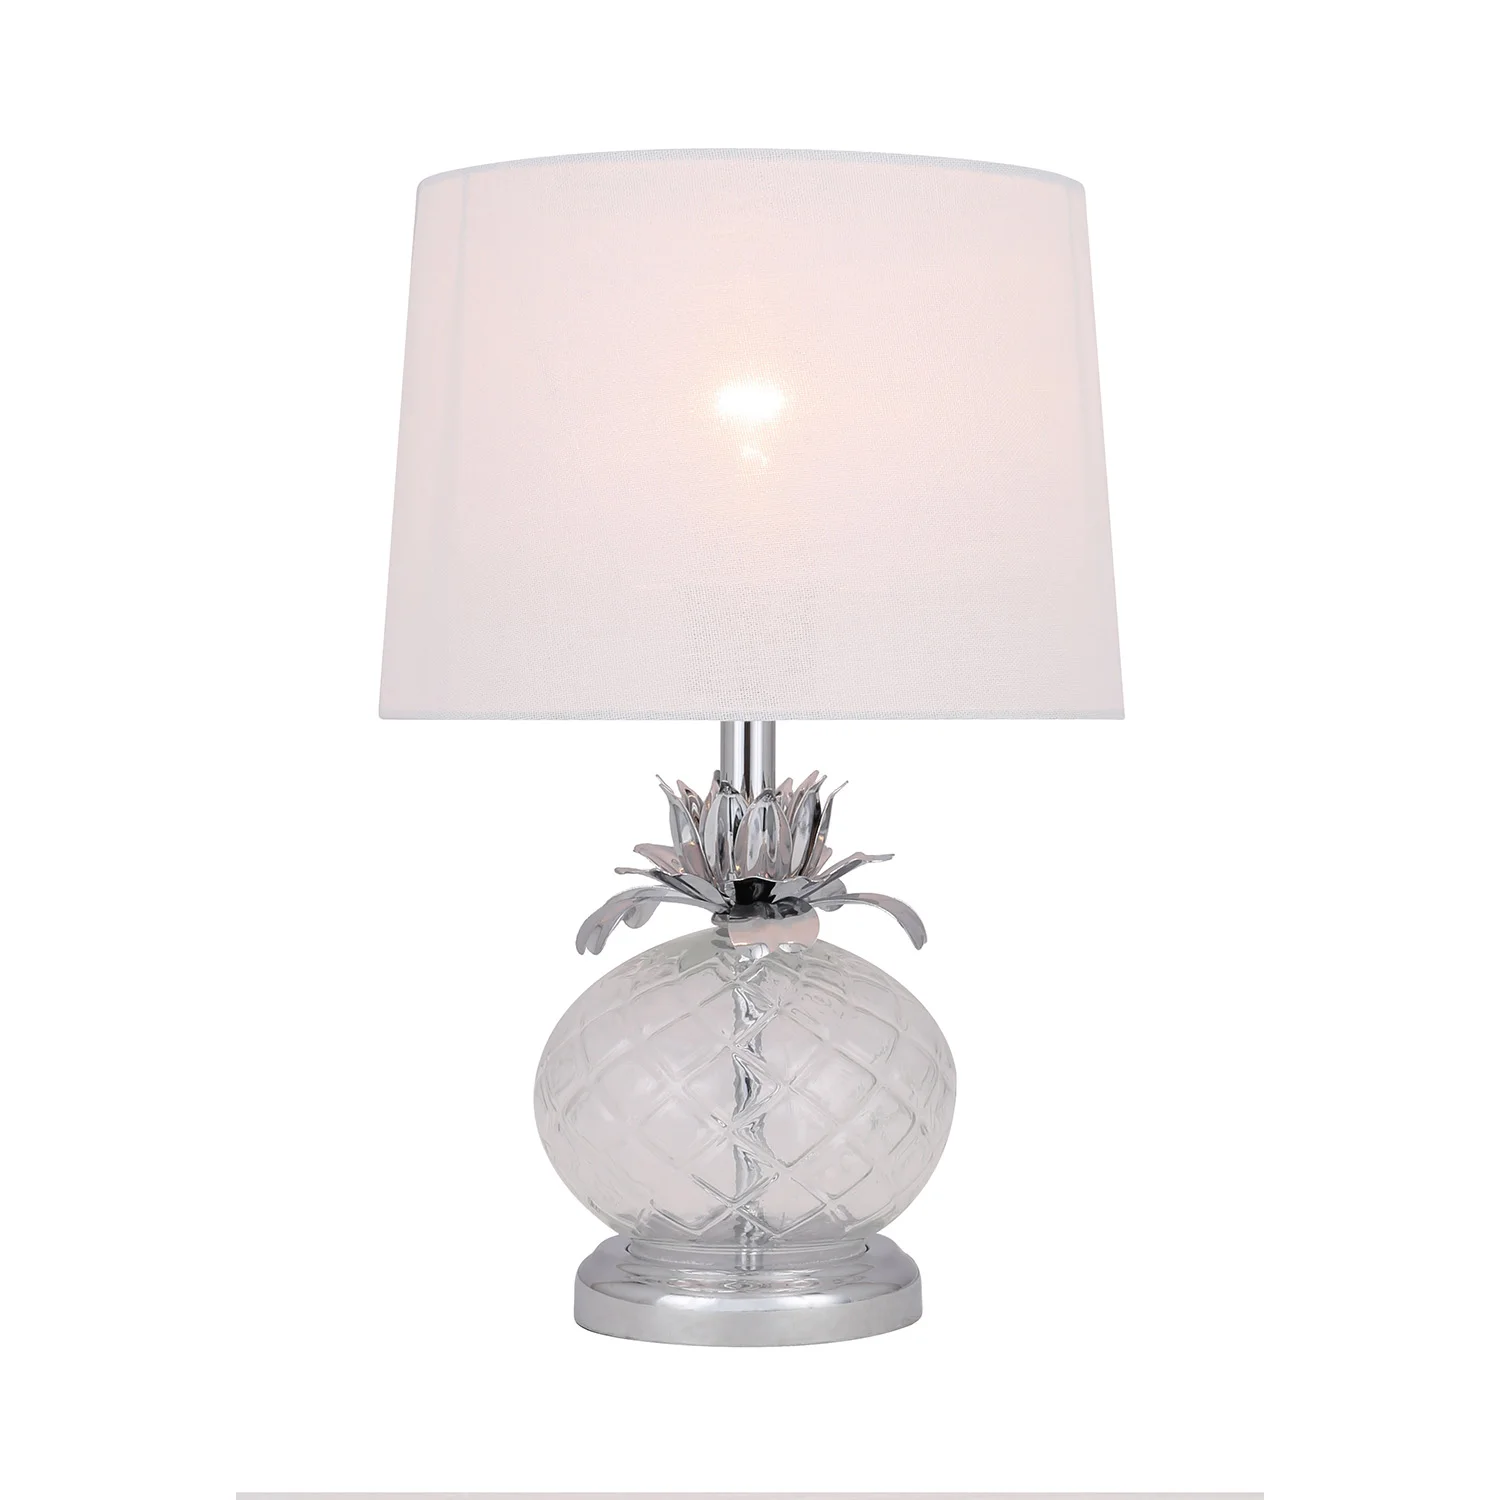 Modern Pineapple Shaped  Clear Glass And White Linen Shade creative smart Table Lamps For Livingroom,Bedroom